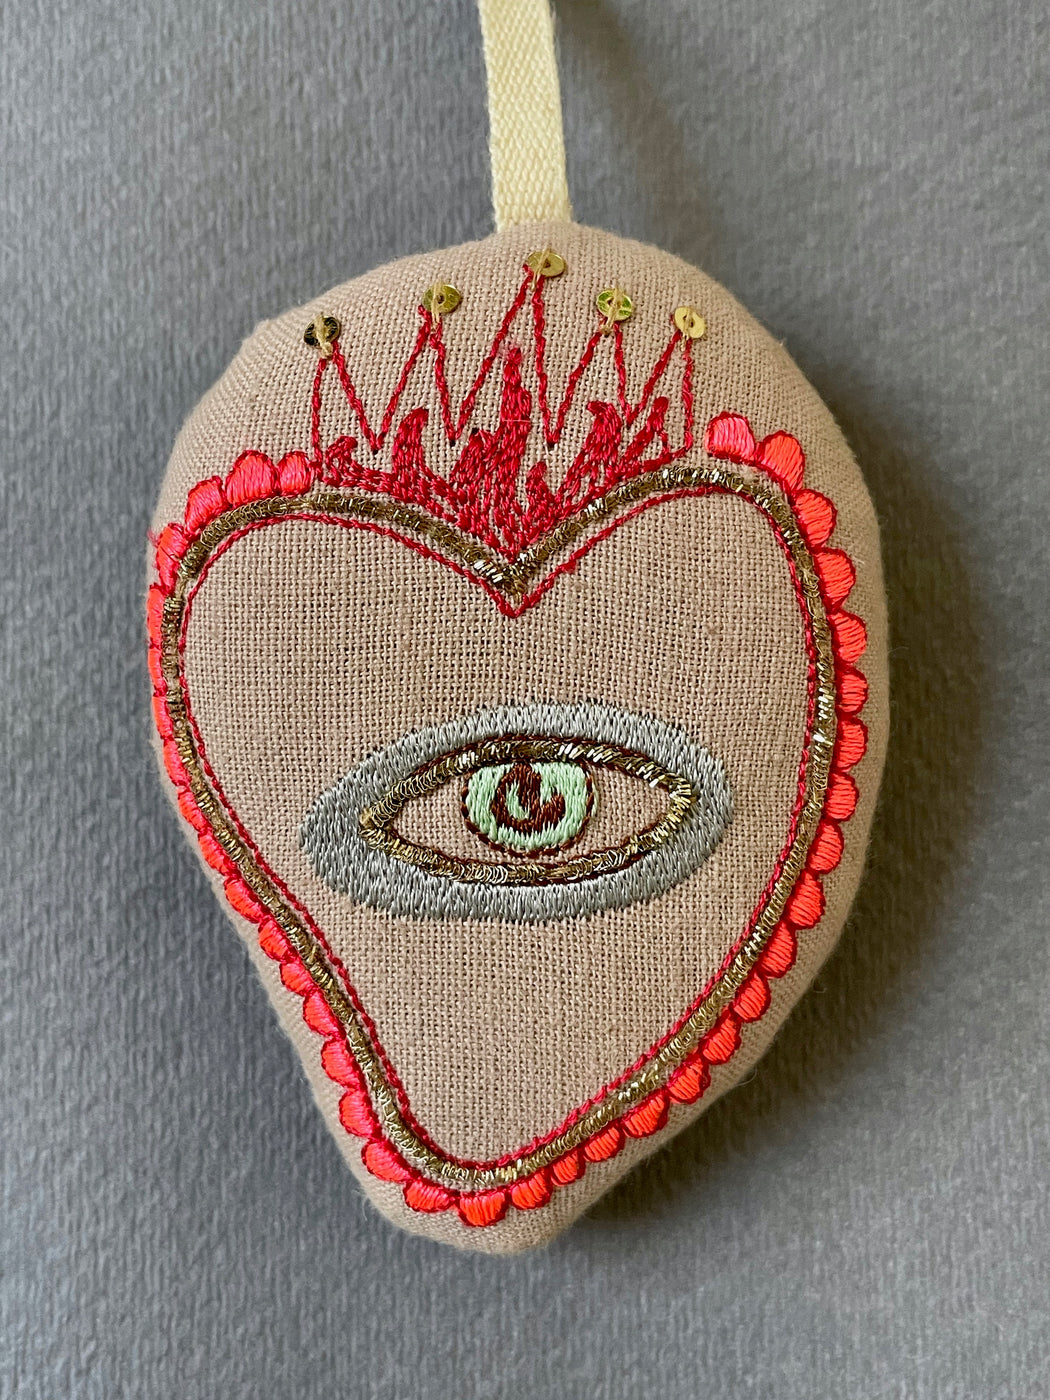 "Watchful Heart" Embroidered Lavender Sachet by Emma Mierop